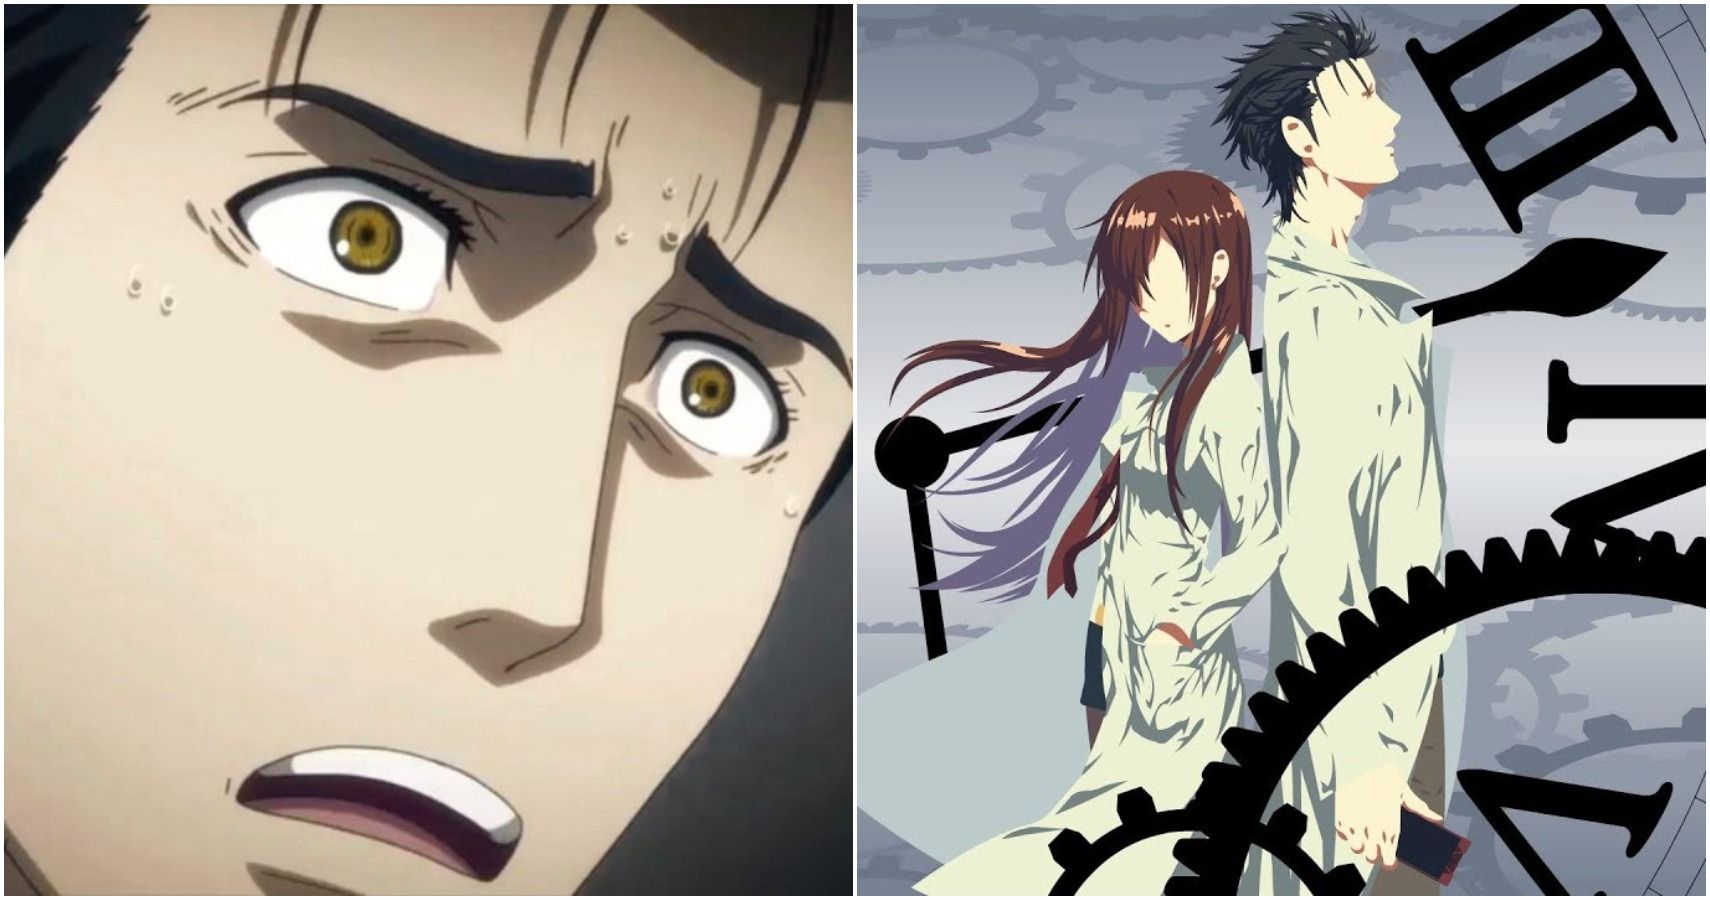 SteinsGate Should you watch the anime or play the visual novel